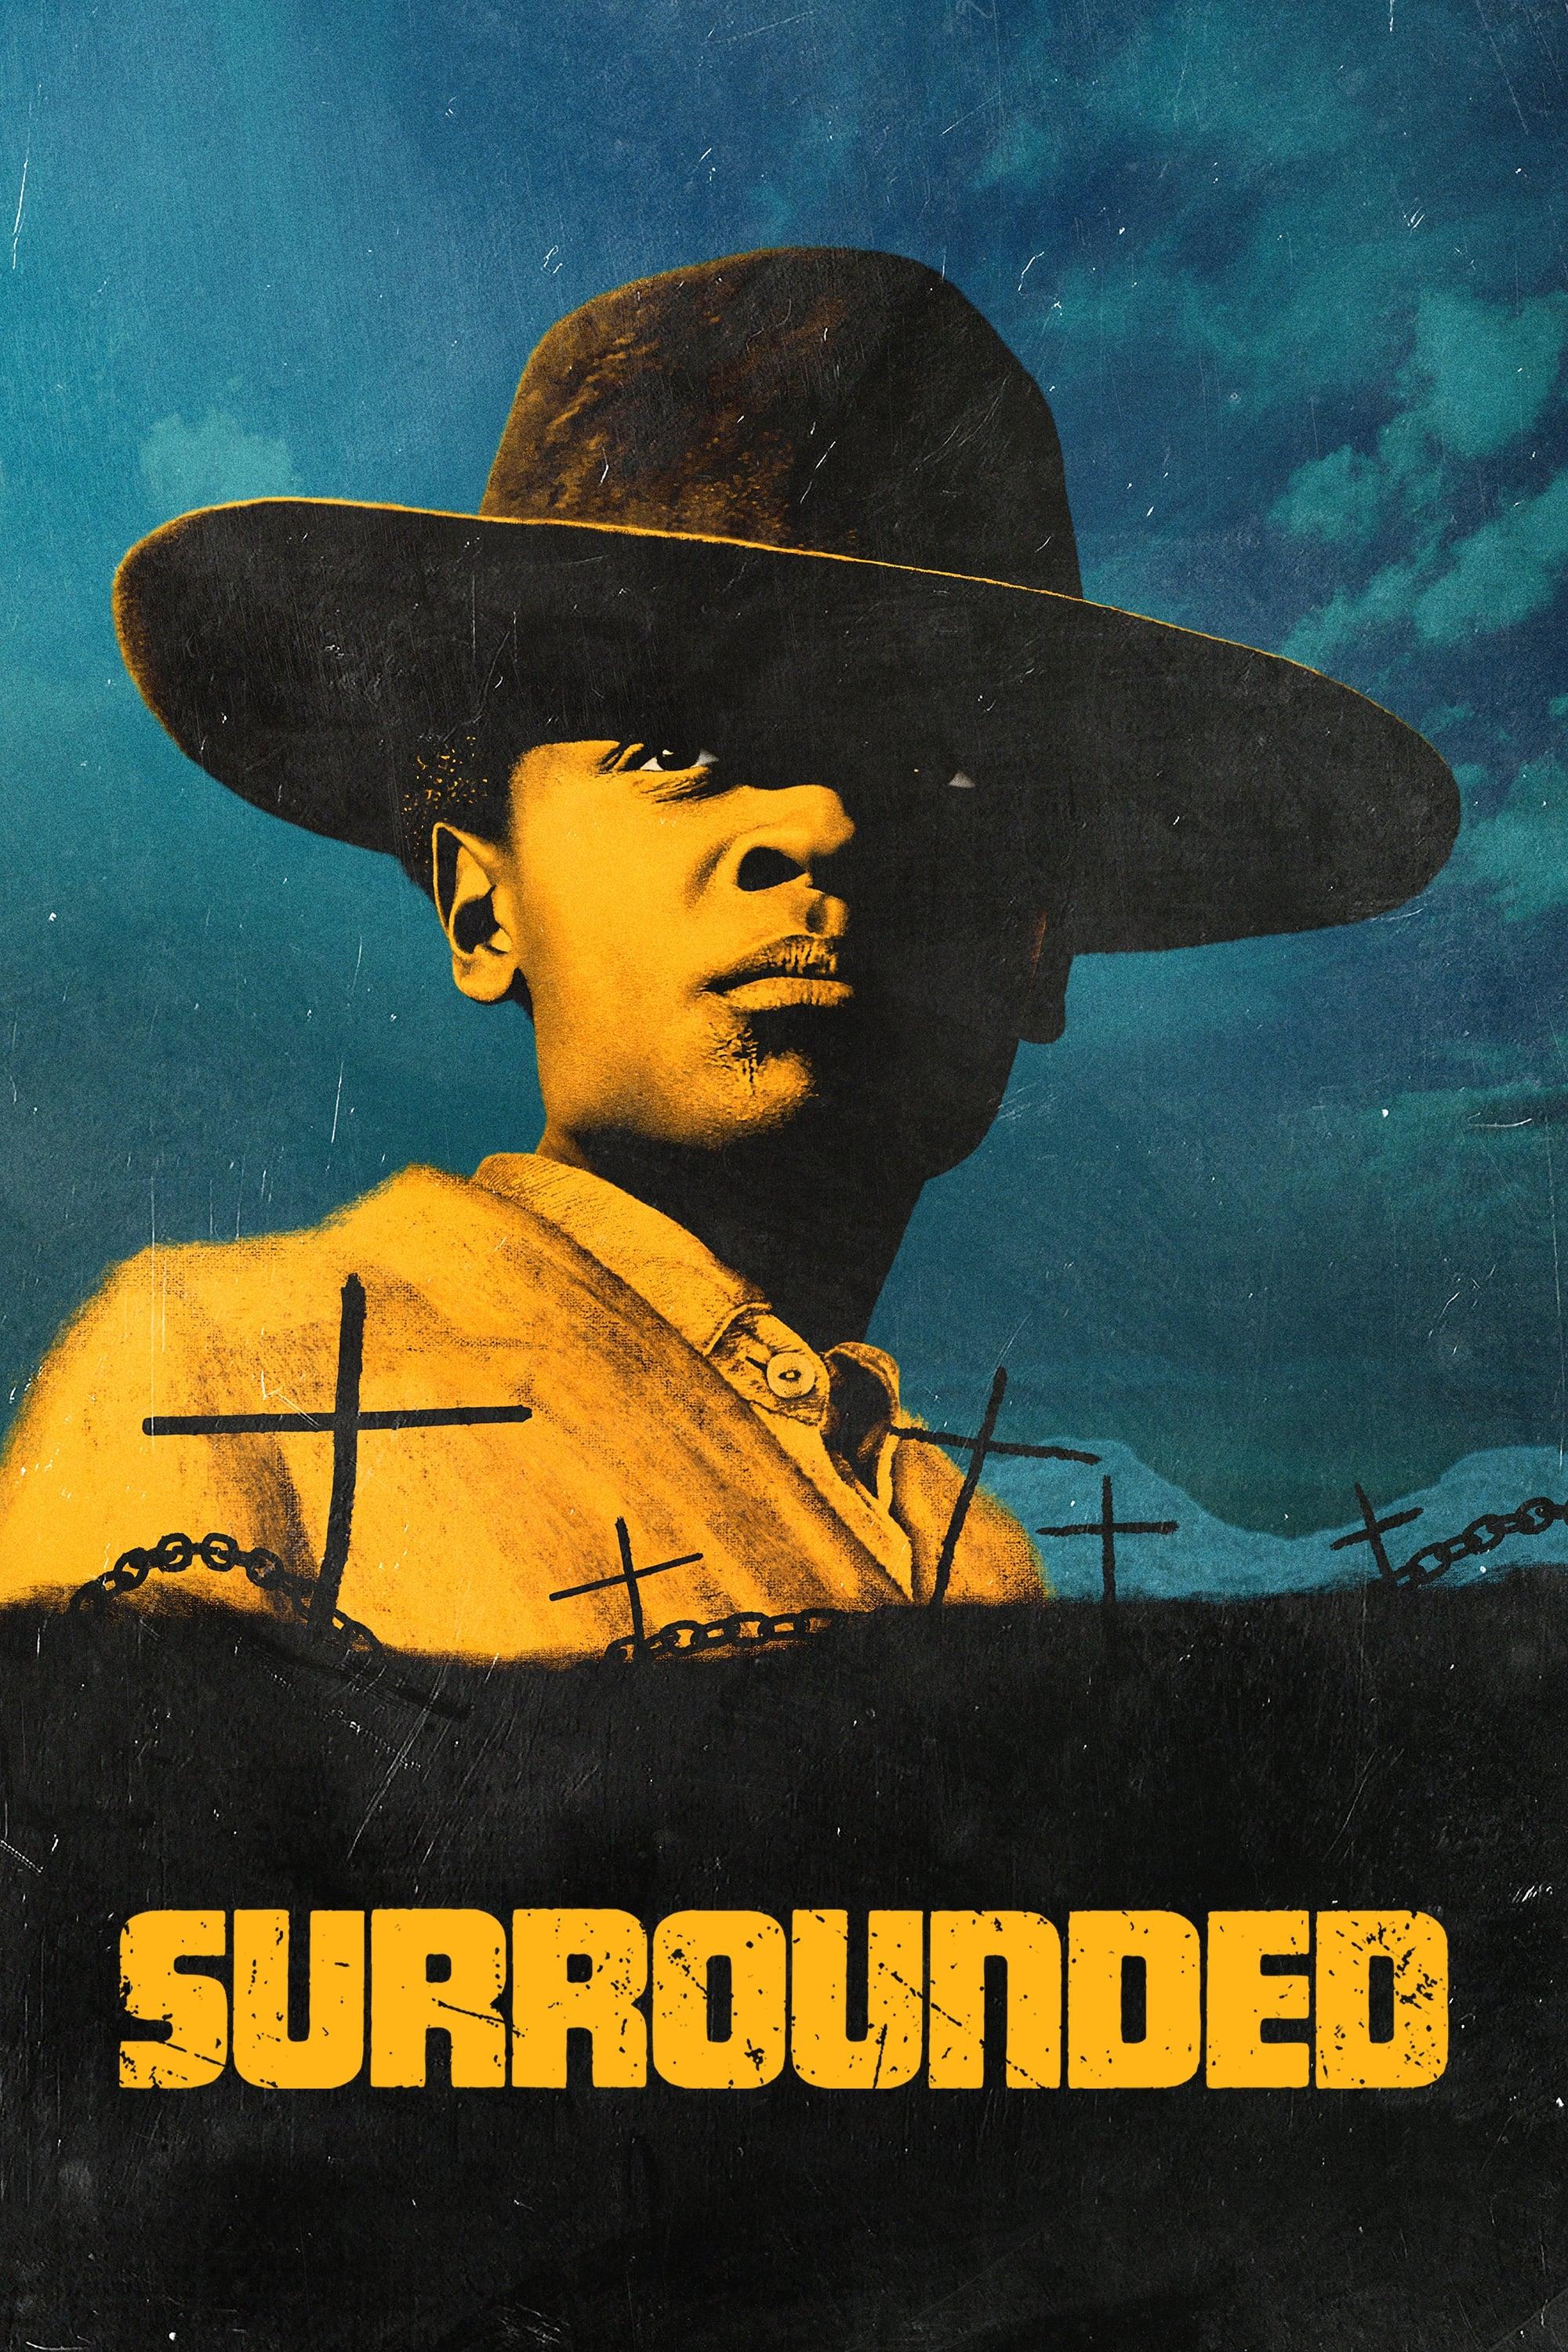 Surrounded poster